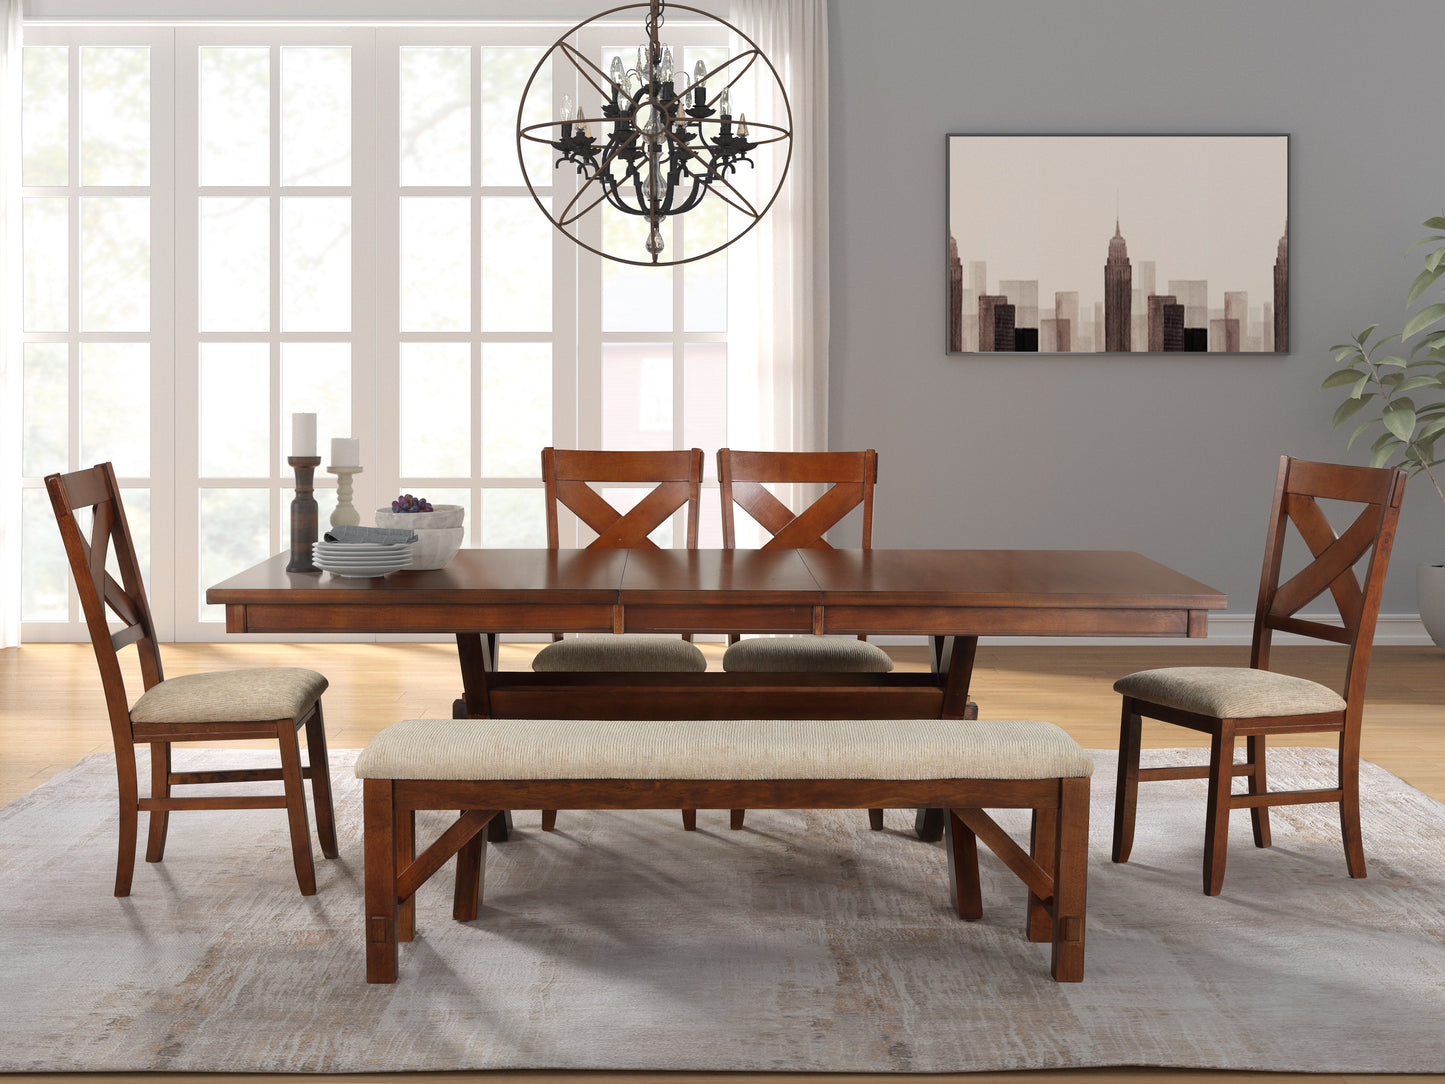 Karven Wood 6-Piece Dining Set, Extendable Trestle Dining Table with 4 Chairs and Bench, Dark Hazelnut